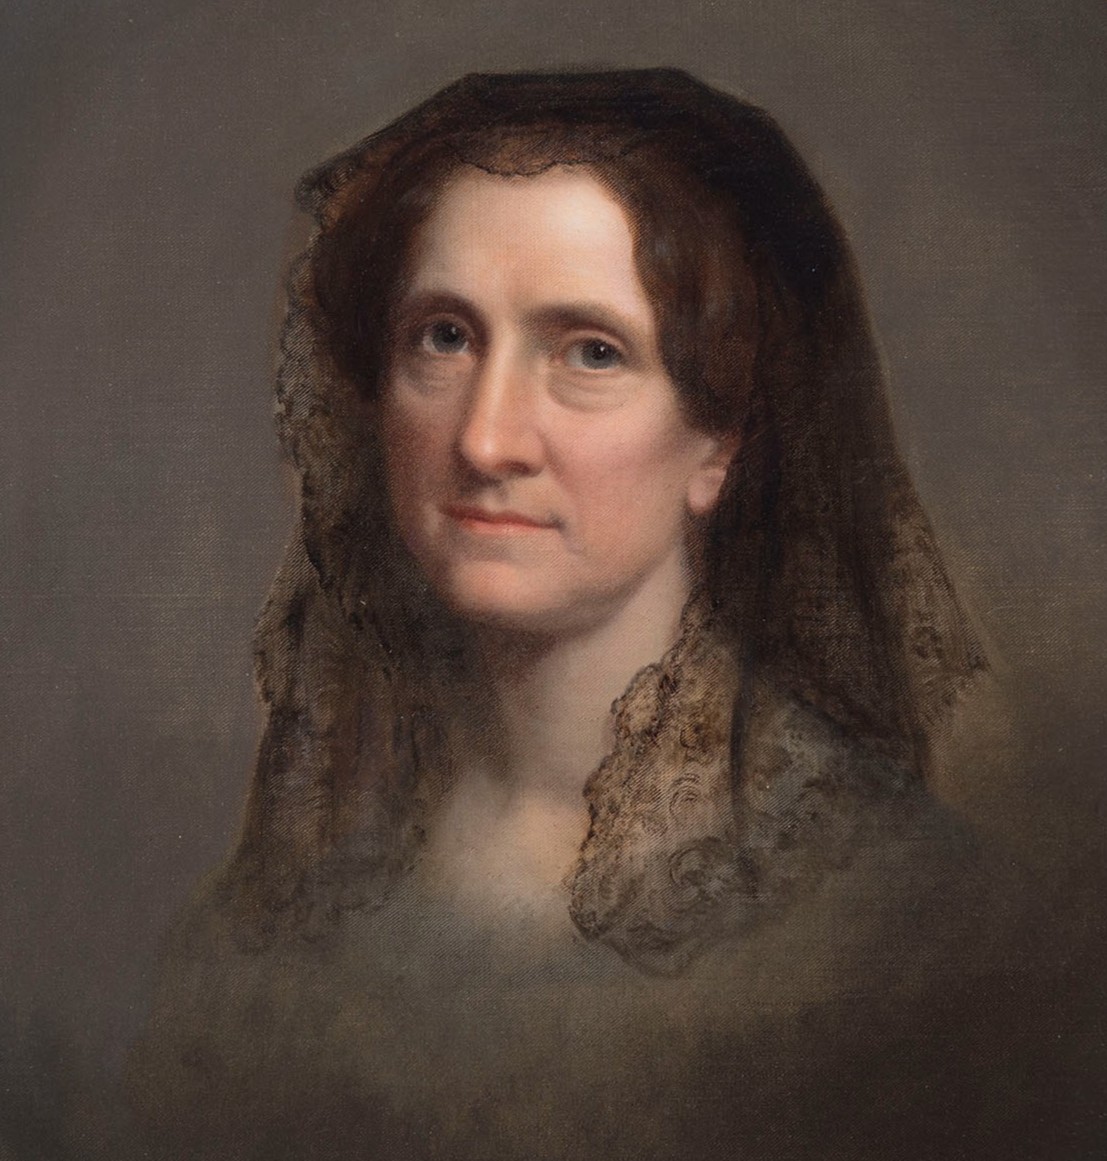 Ann Pamela Cunningham founded the Mount Vernon Ladies' Association, one of the earliest preservation and heritage organizations in the United States. The organization was responsible for saving and restoring Mount Vernon. Learn more: bit.ly/3wmrSap #WomensHistoryMonth